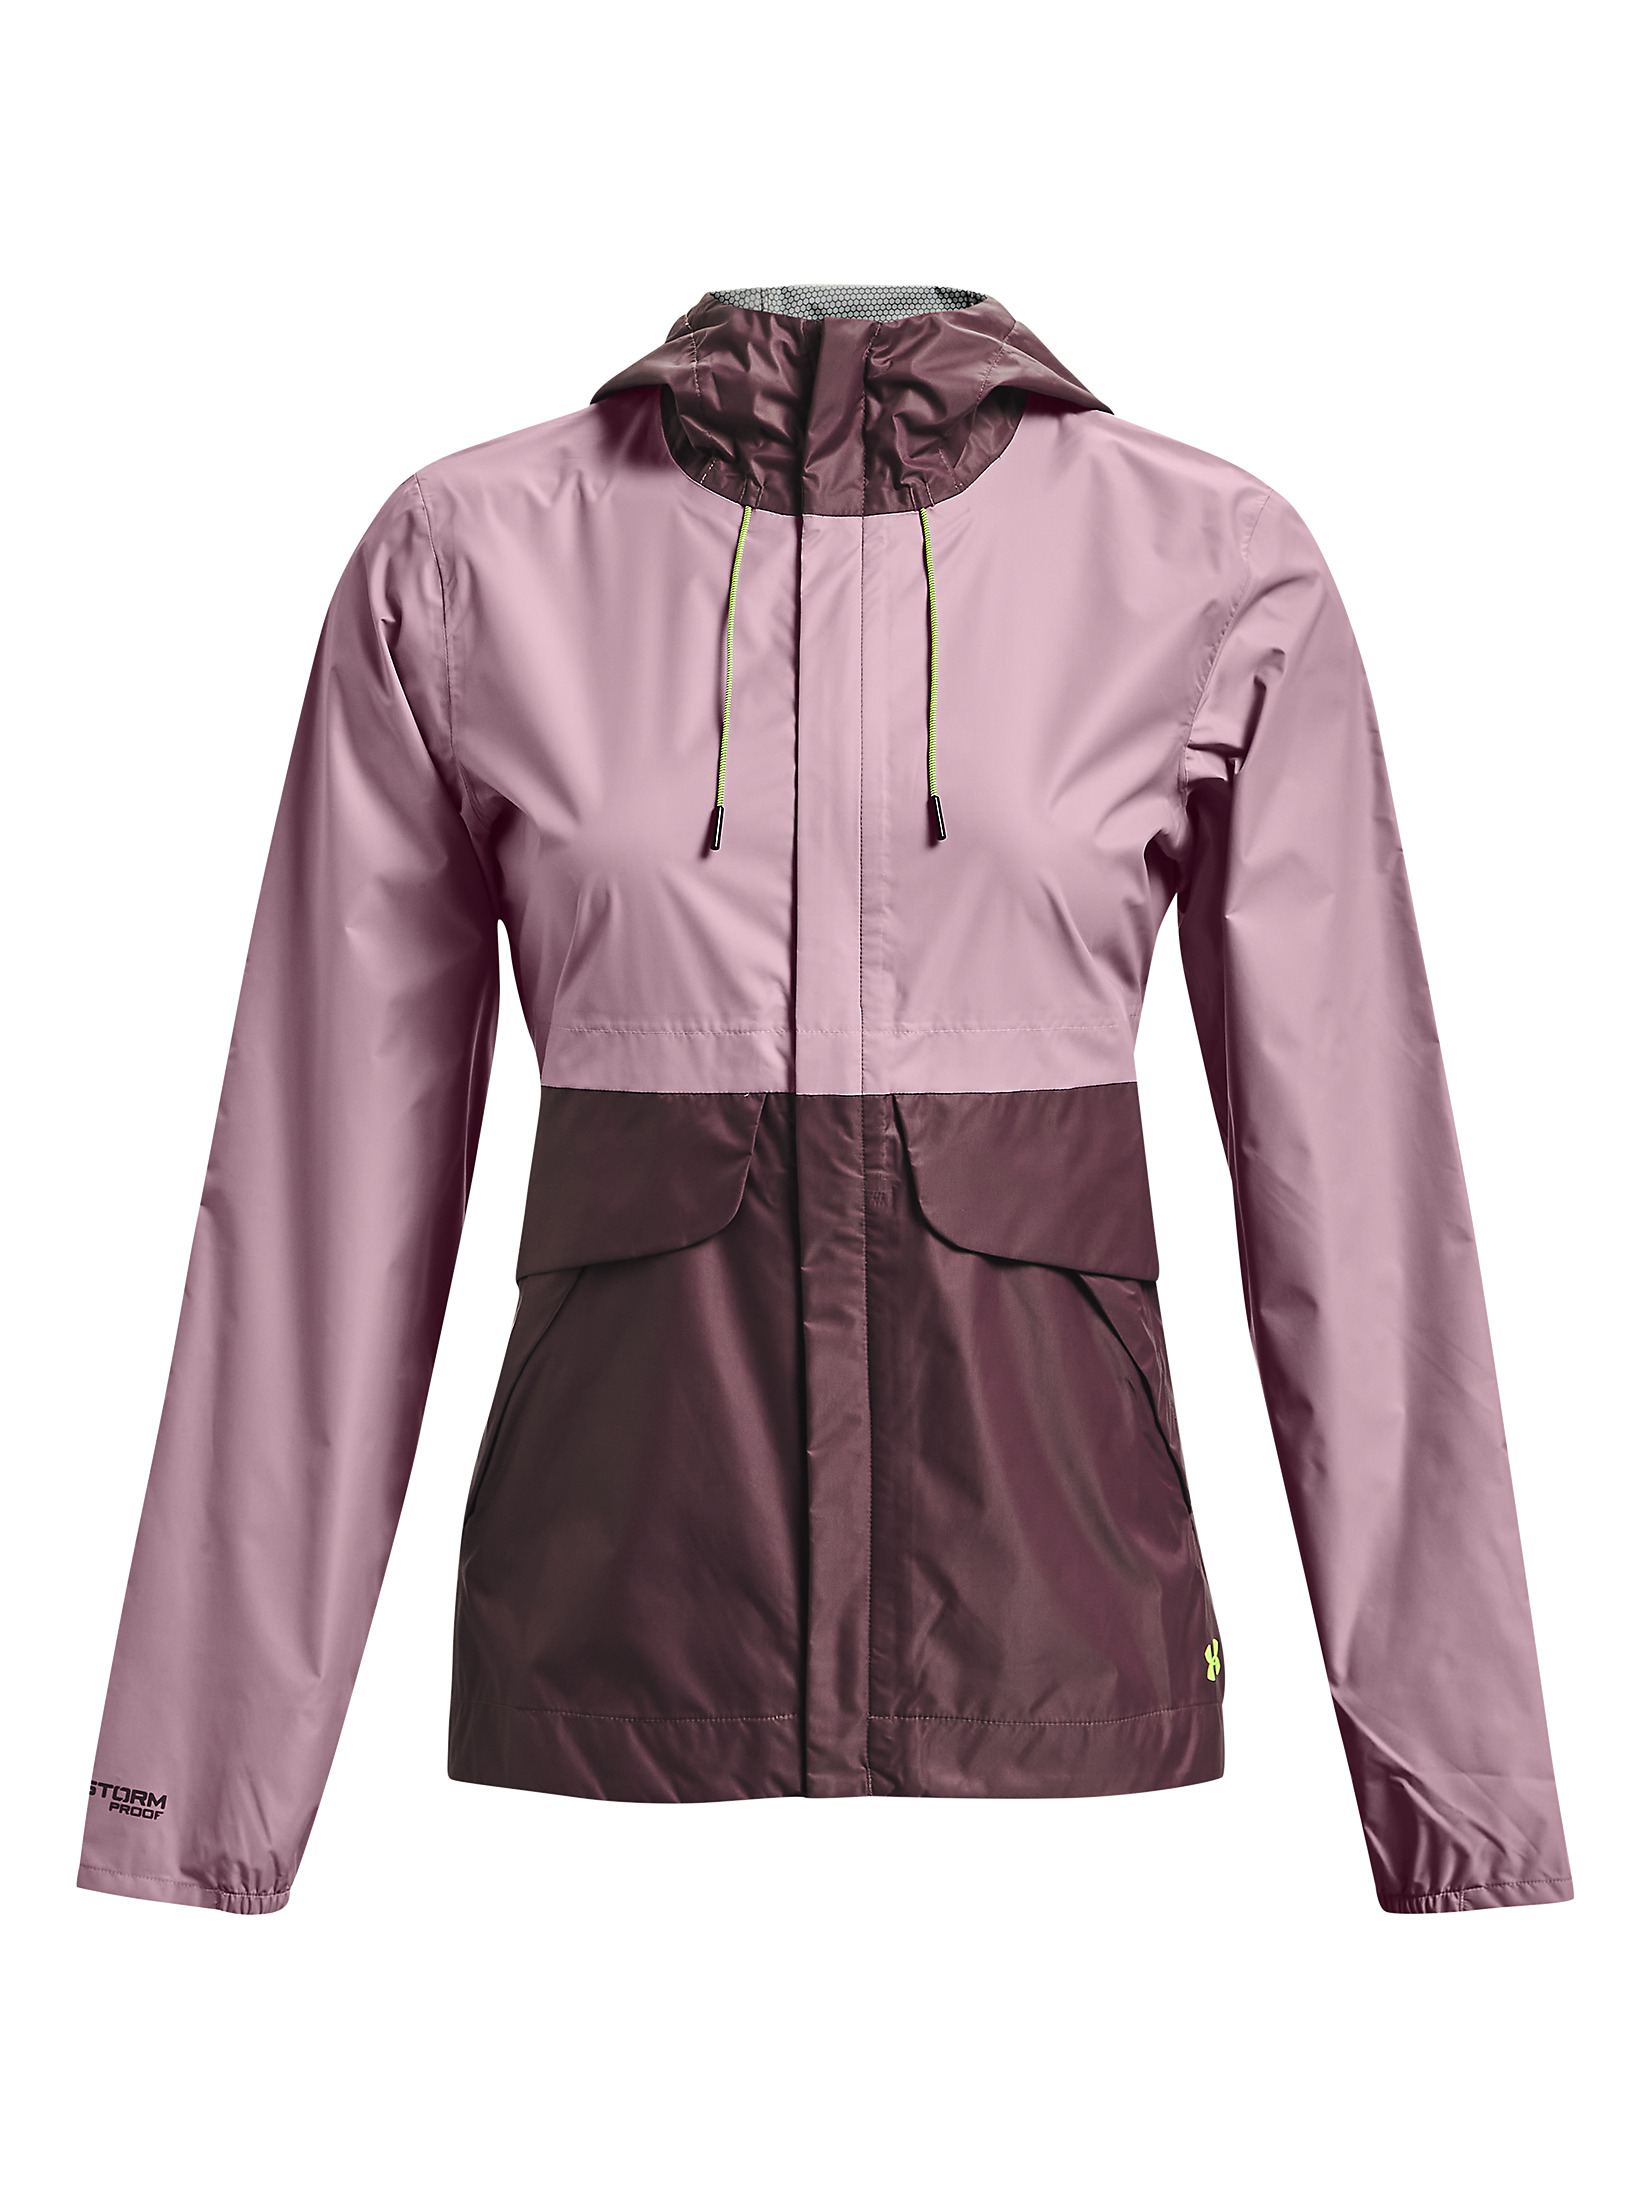 UNDER ARMOUR Sportjacke in Pastelllila, Beere 